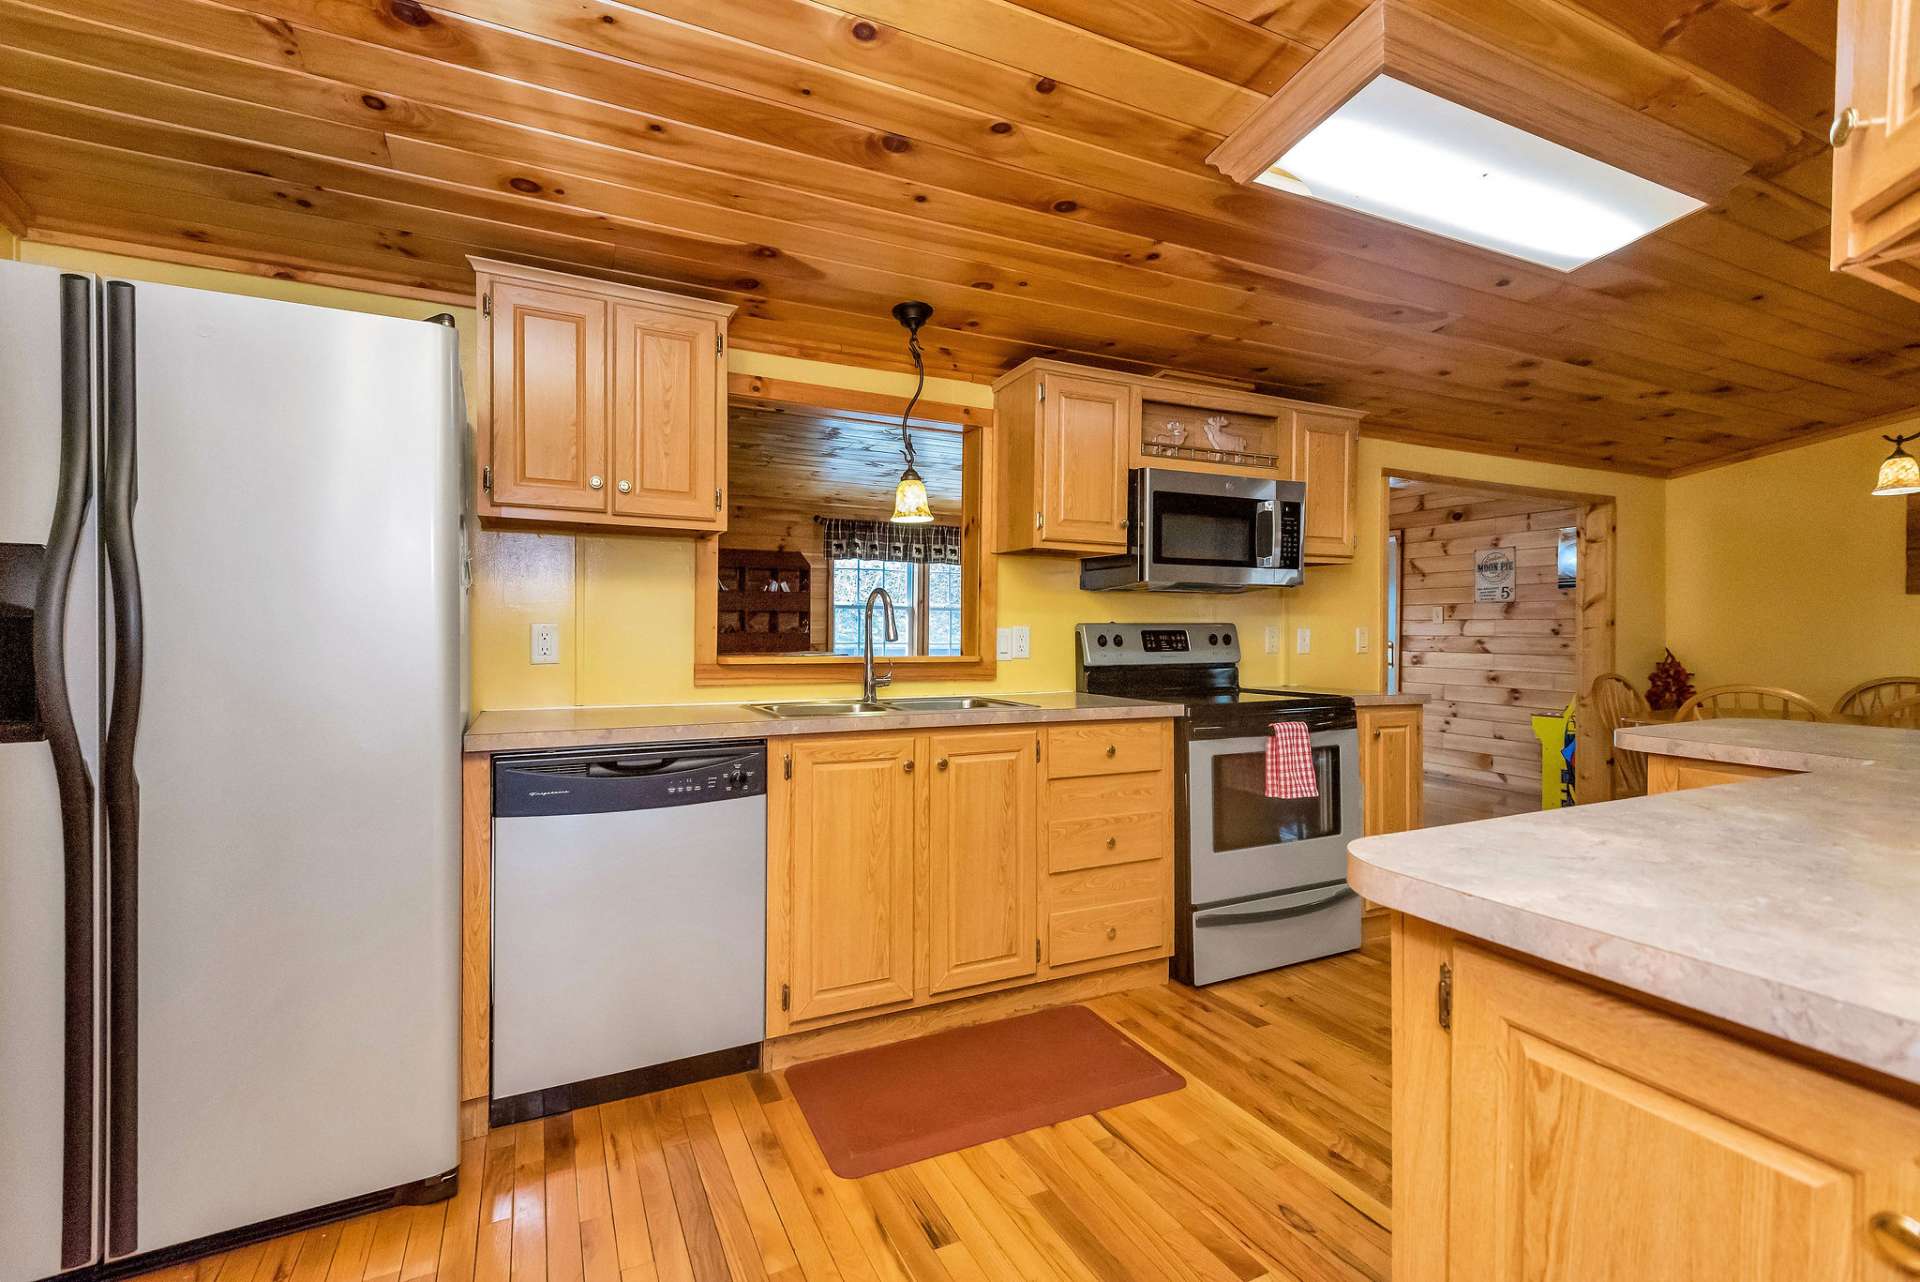 The kitchen features stainless appliances.